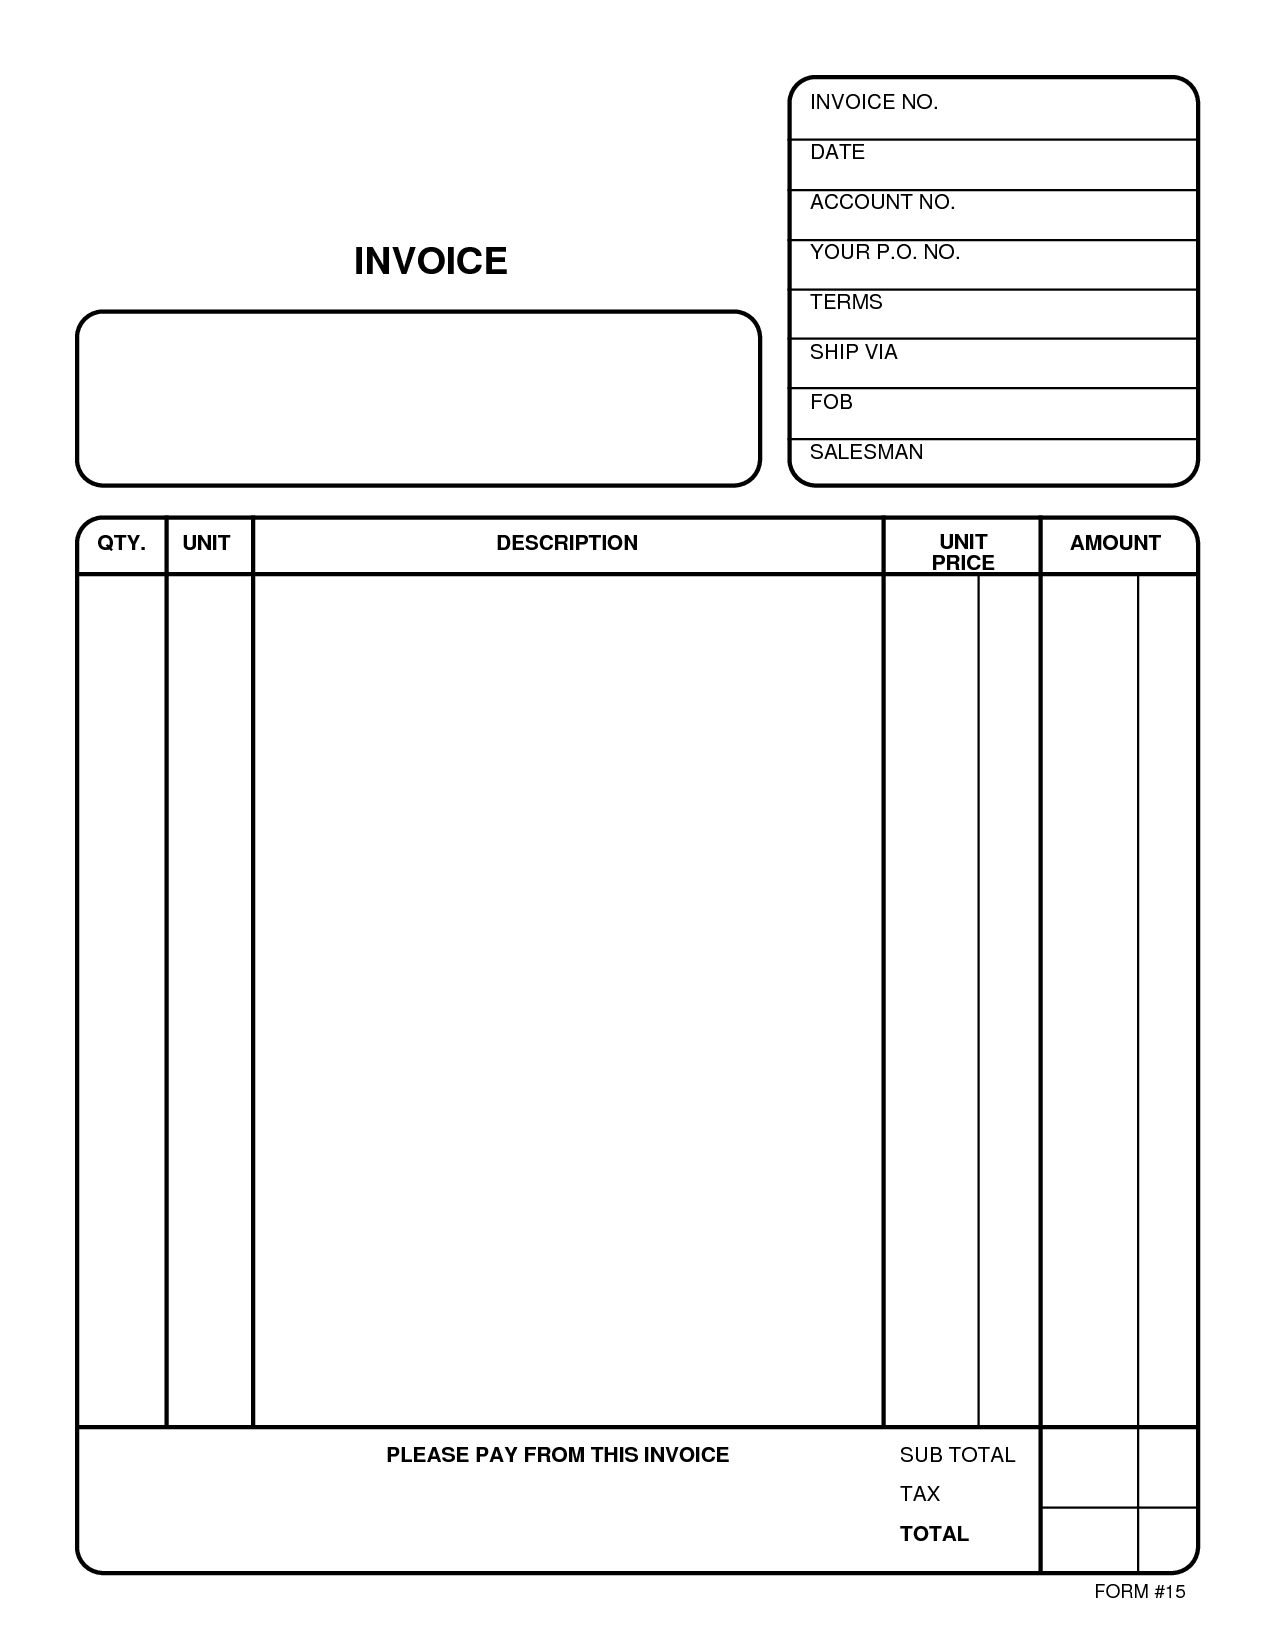 invoice-form-online-invoice-template-ideas